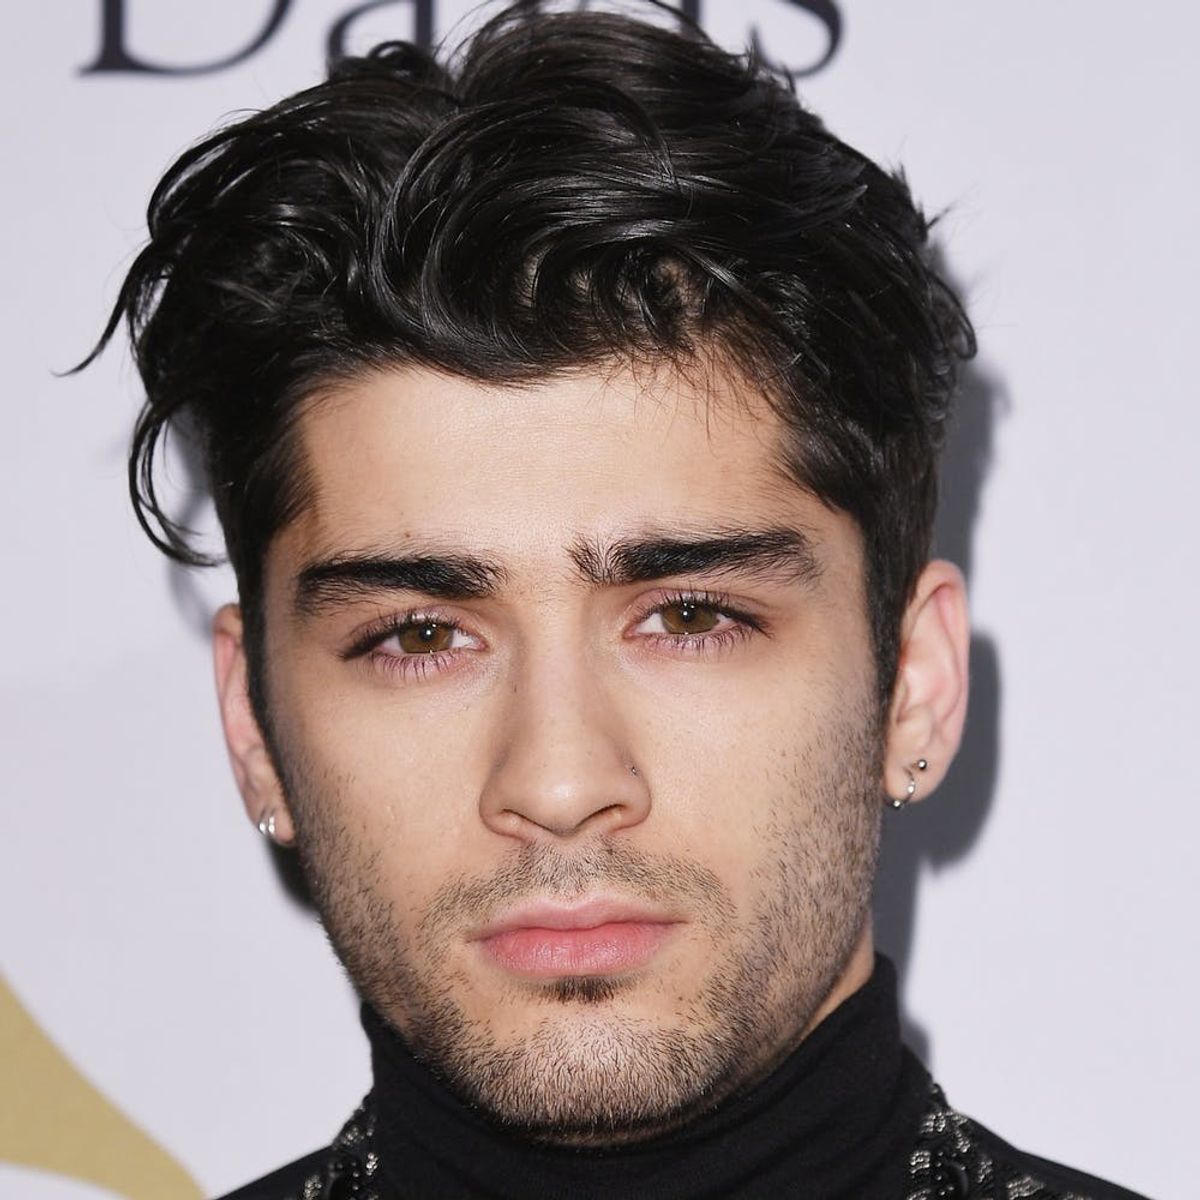 Zayn Malik Is Catching Heat for This Photo of Him in Cornrows